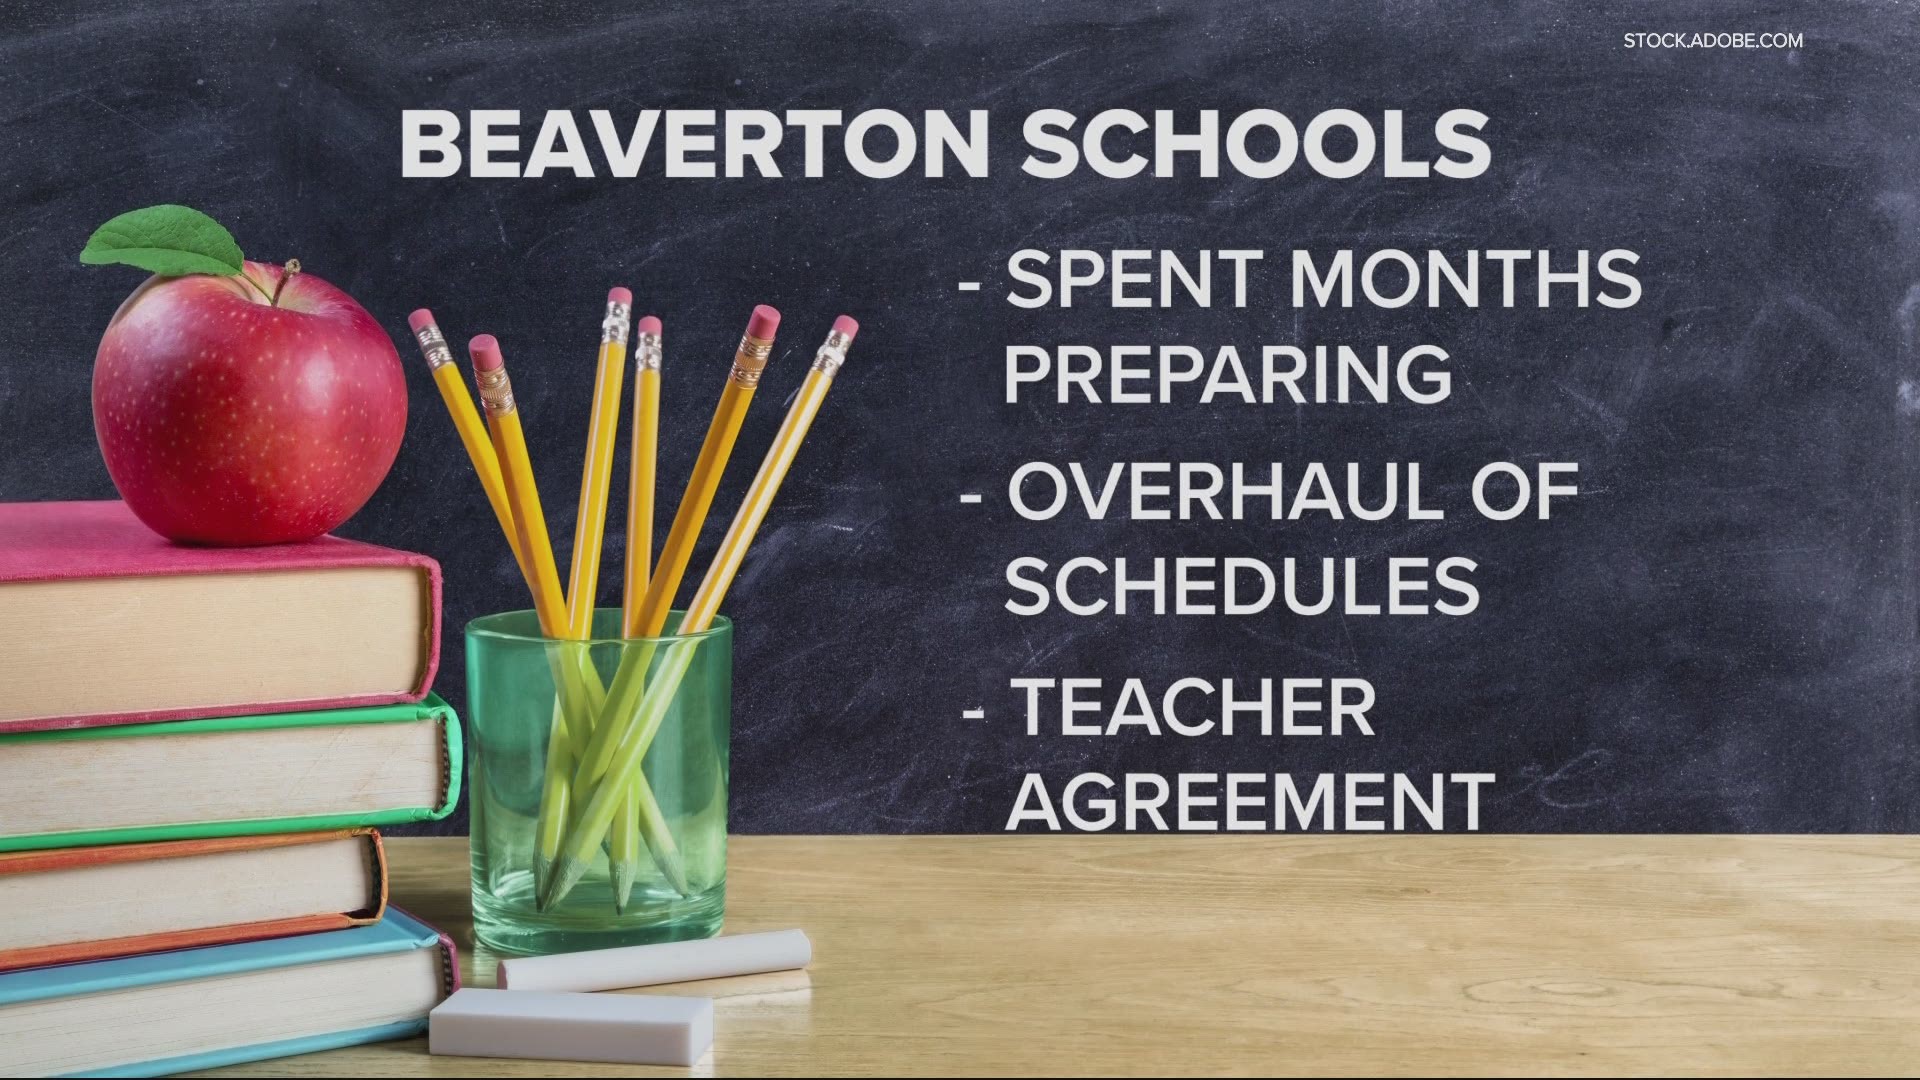 This week the Beaverton School District welcomed back its youngest students, but soon older kids be in class as well. Here's how some parents are feeling.